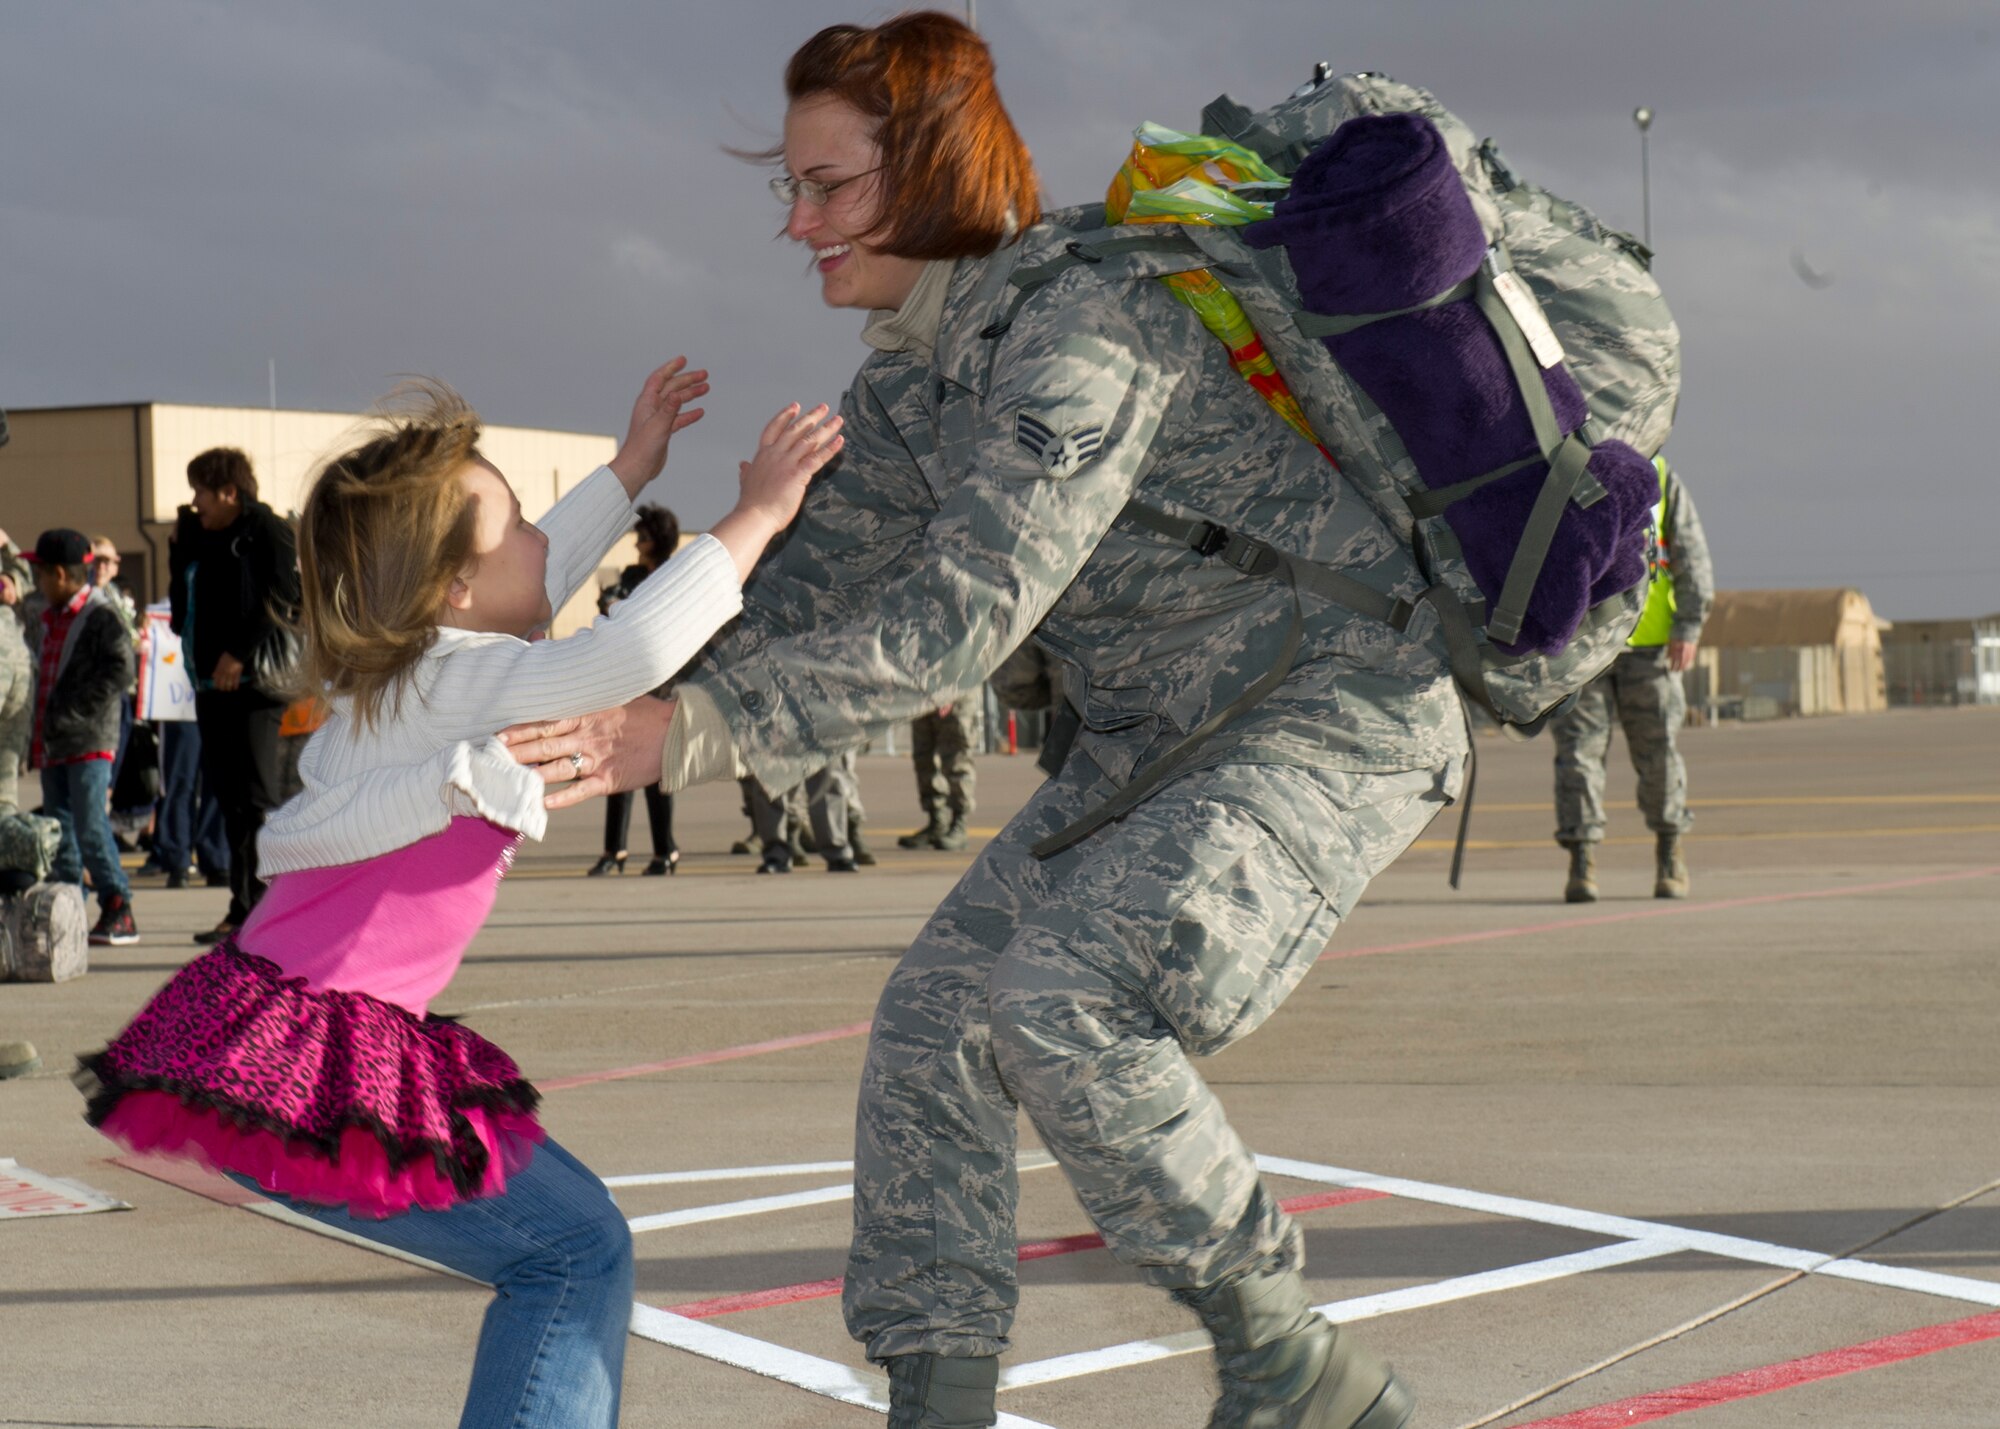 A Senior Airman returning from deployment greets her daughter after landing on the Holloman AFB, N.M., flightline Jan. 28.  F-22 Raptors and around 200 personnel returned Monday from a 9-month deployment to Southwest Asia ensuring regional security and joint tactical air operations. (U.S. Air Force photo by Airman 1st Class Michael Shoemaker/Released)